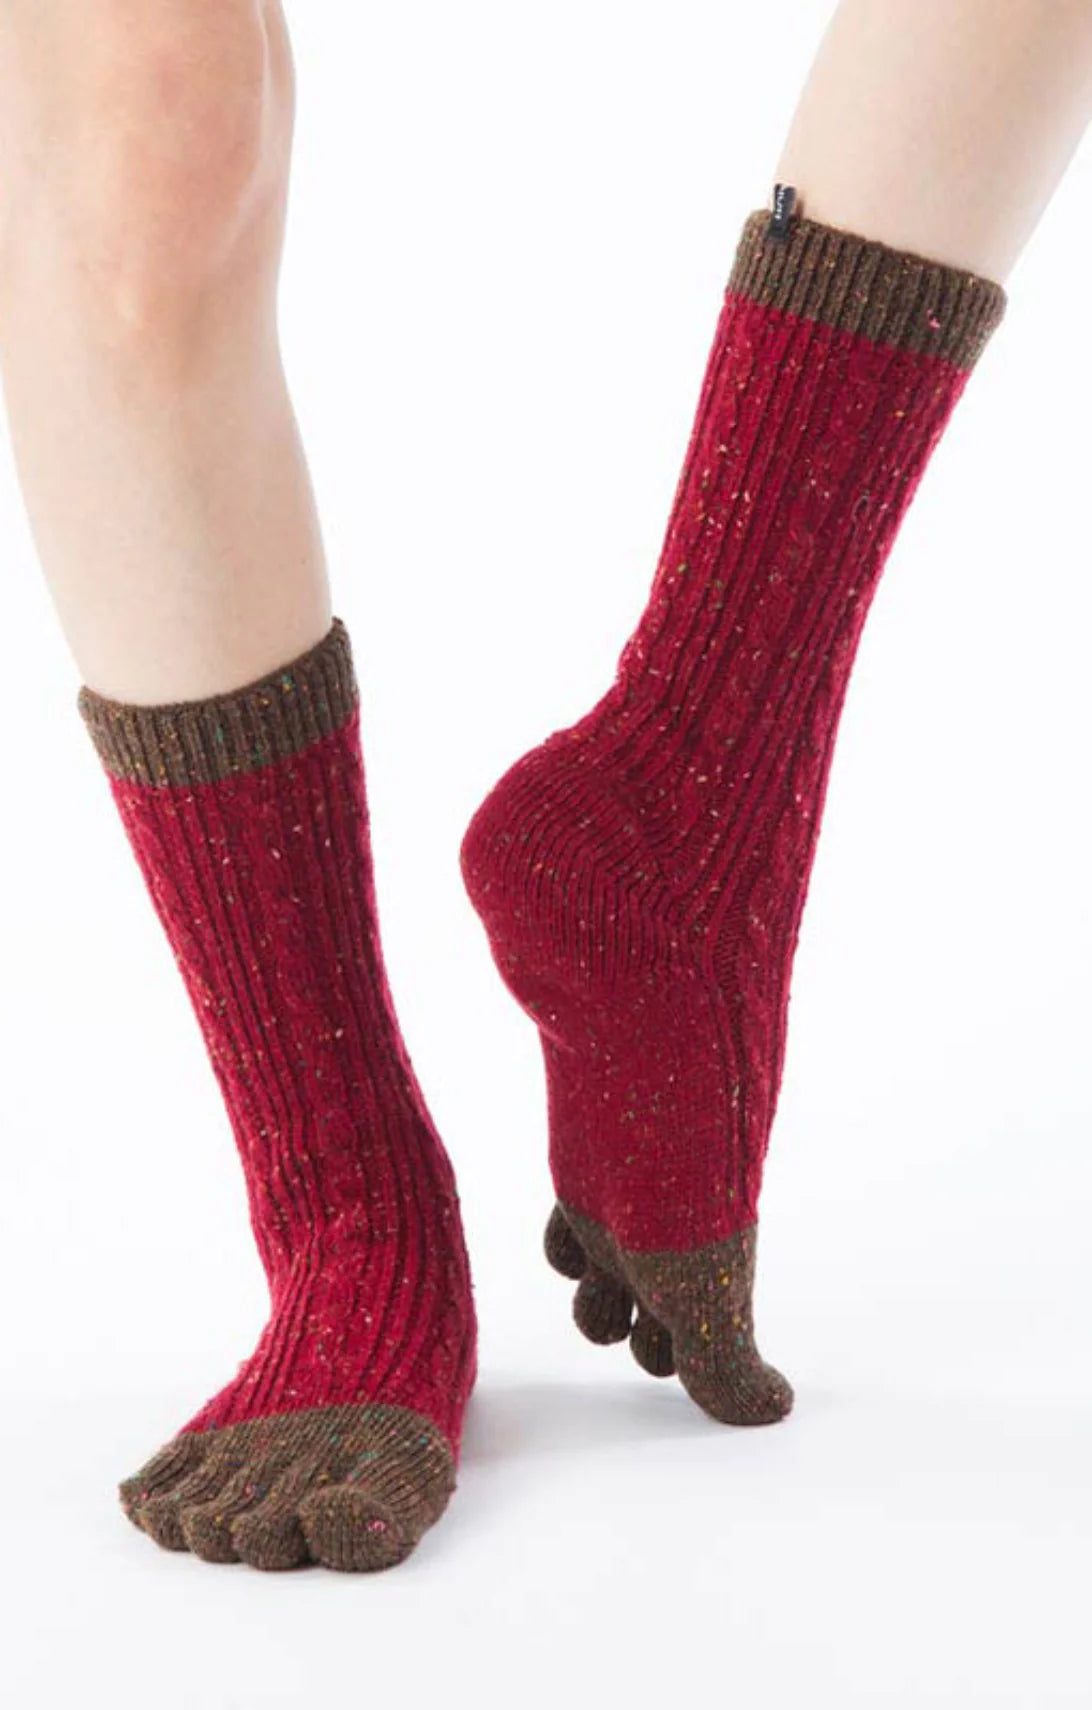 🧦Wool Blend Cable Striped Midcalf Toe Socks🧦 Keep warm and cozy